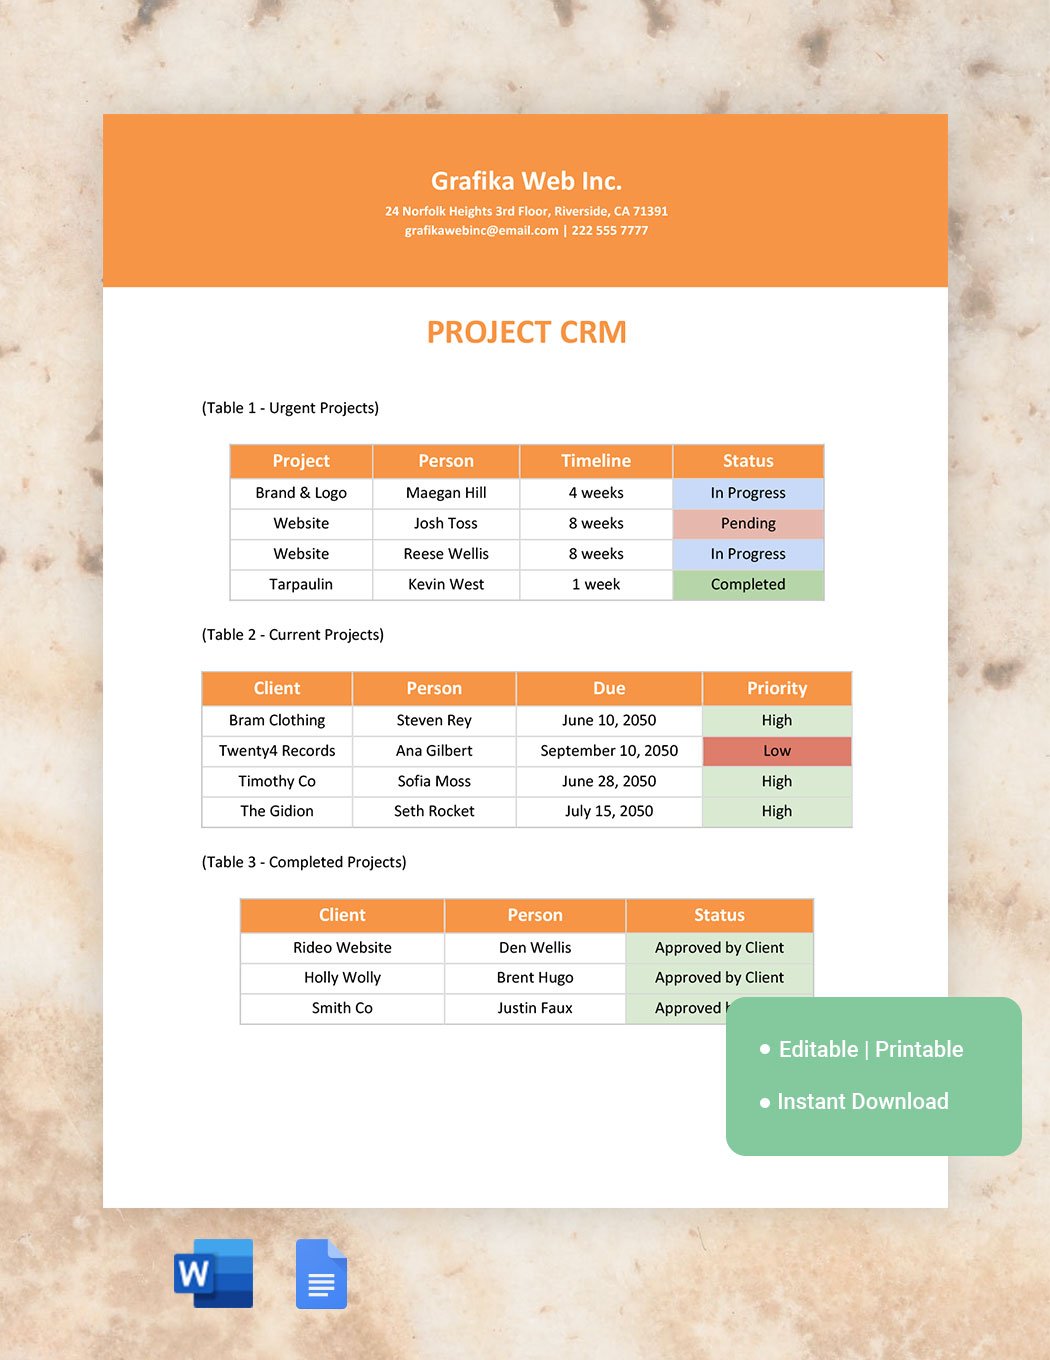 Project CRM Template in Word, Google Docs